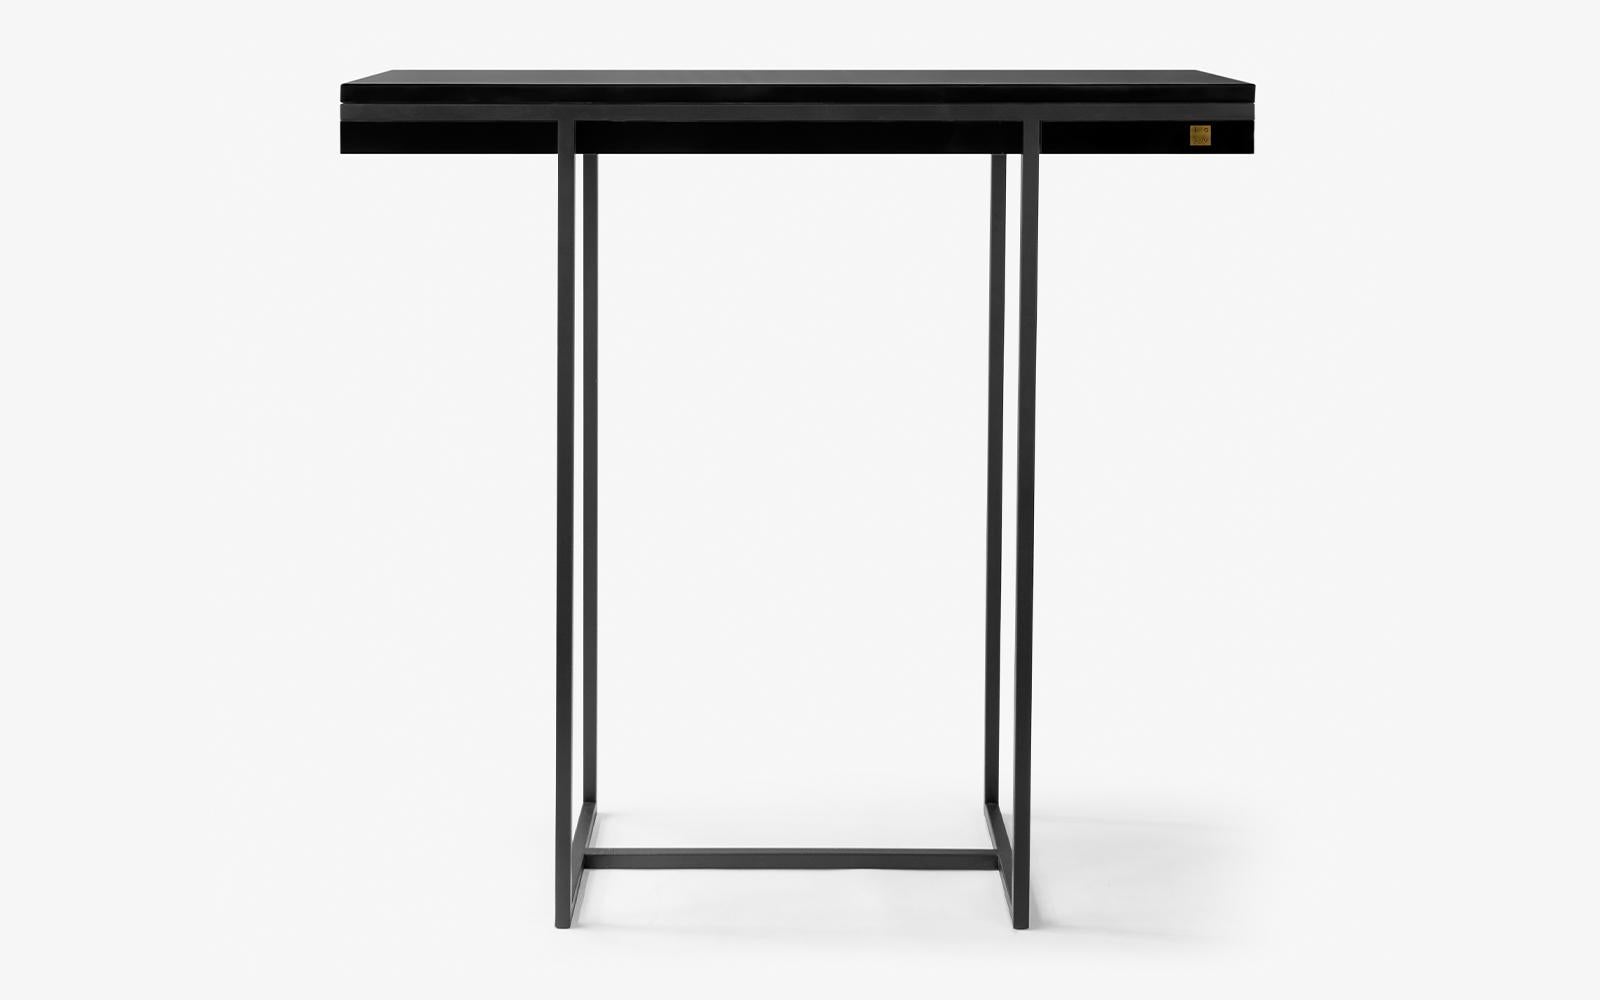 Hidden black sideboard by Lagu
Designed by Ufuk Ceylan
Dimensions: W 120 x D 33 x H 90 cm.
Materials: marble, metal.

The Hidden sideboard is encased in Black marble highlighted with metal accents, incorporating a simple